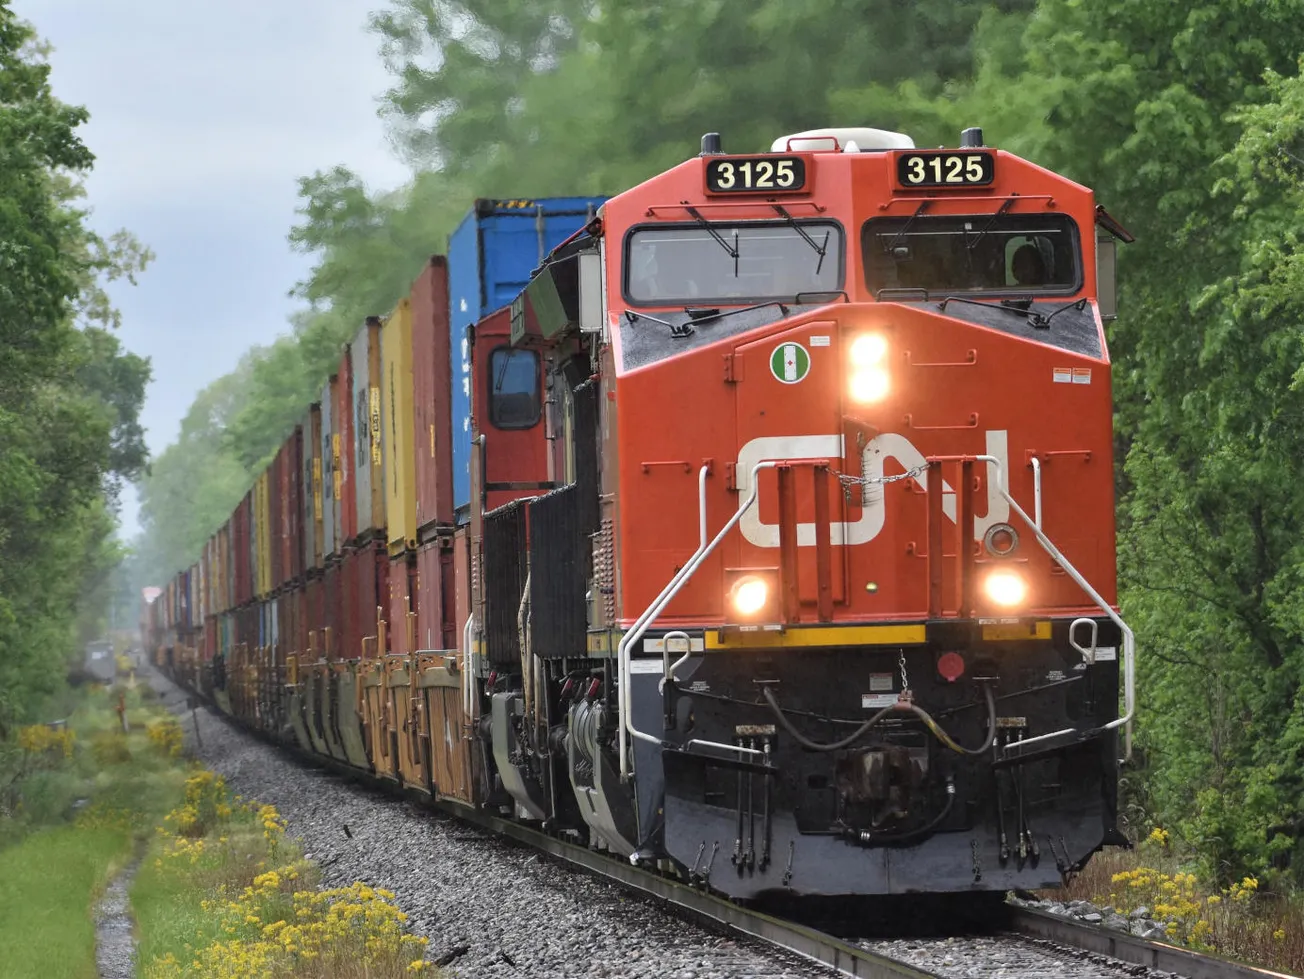 Tell Congress to require two-person freight train crews